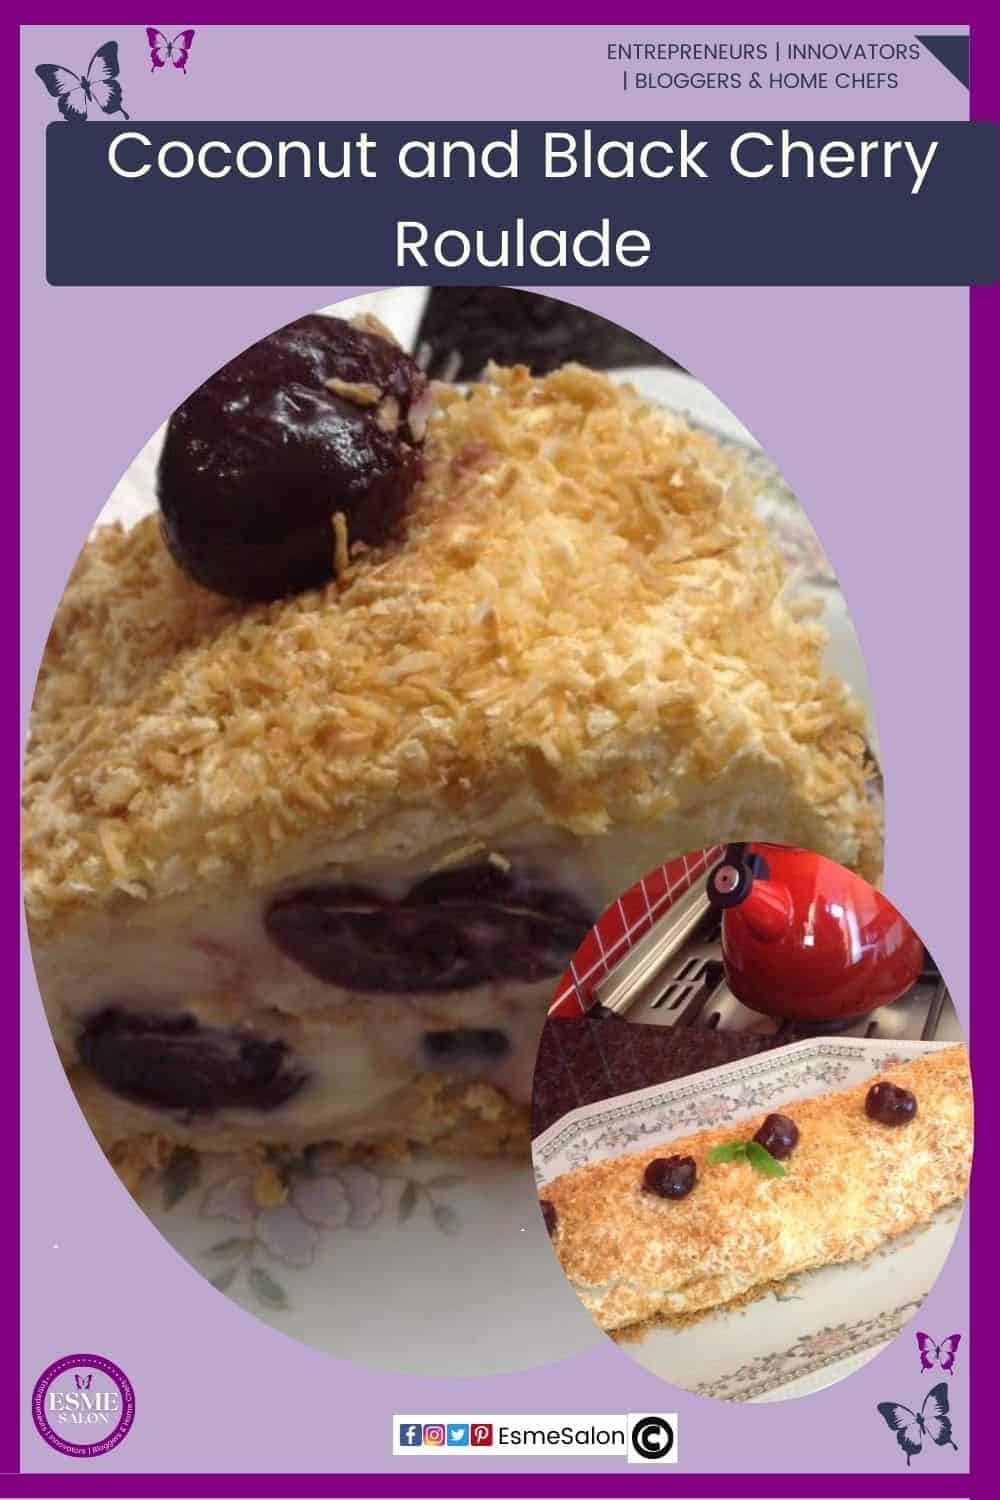 an image of a Coconut Roulade un a white plate with Black Cherries in the middle as well as on top